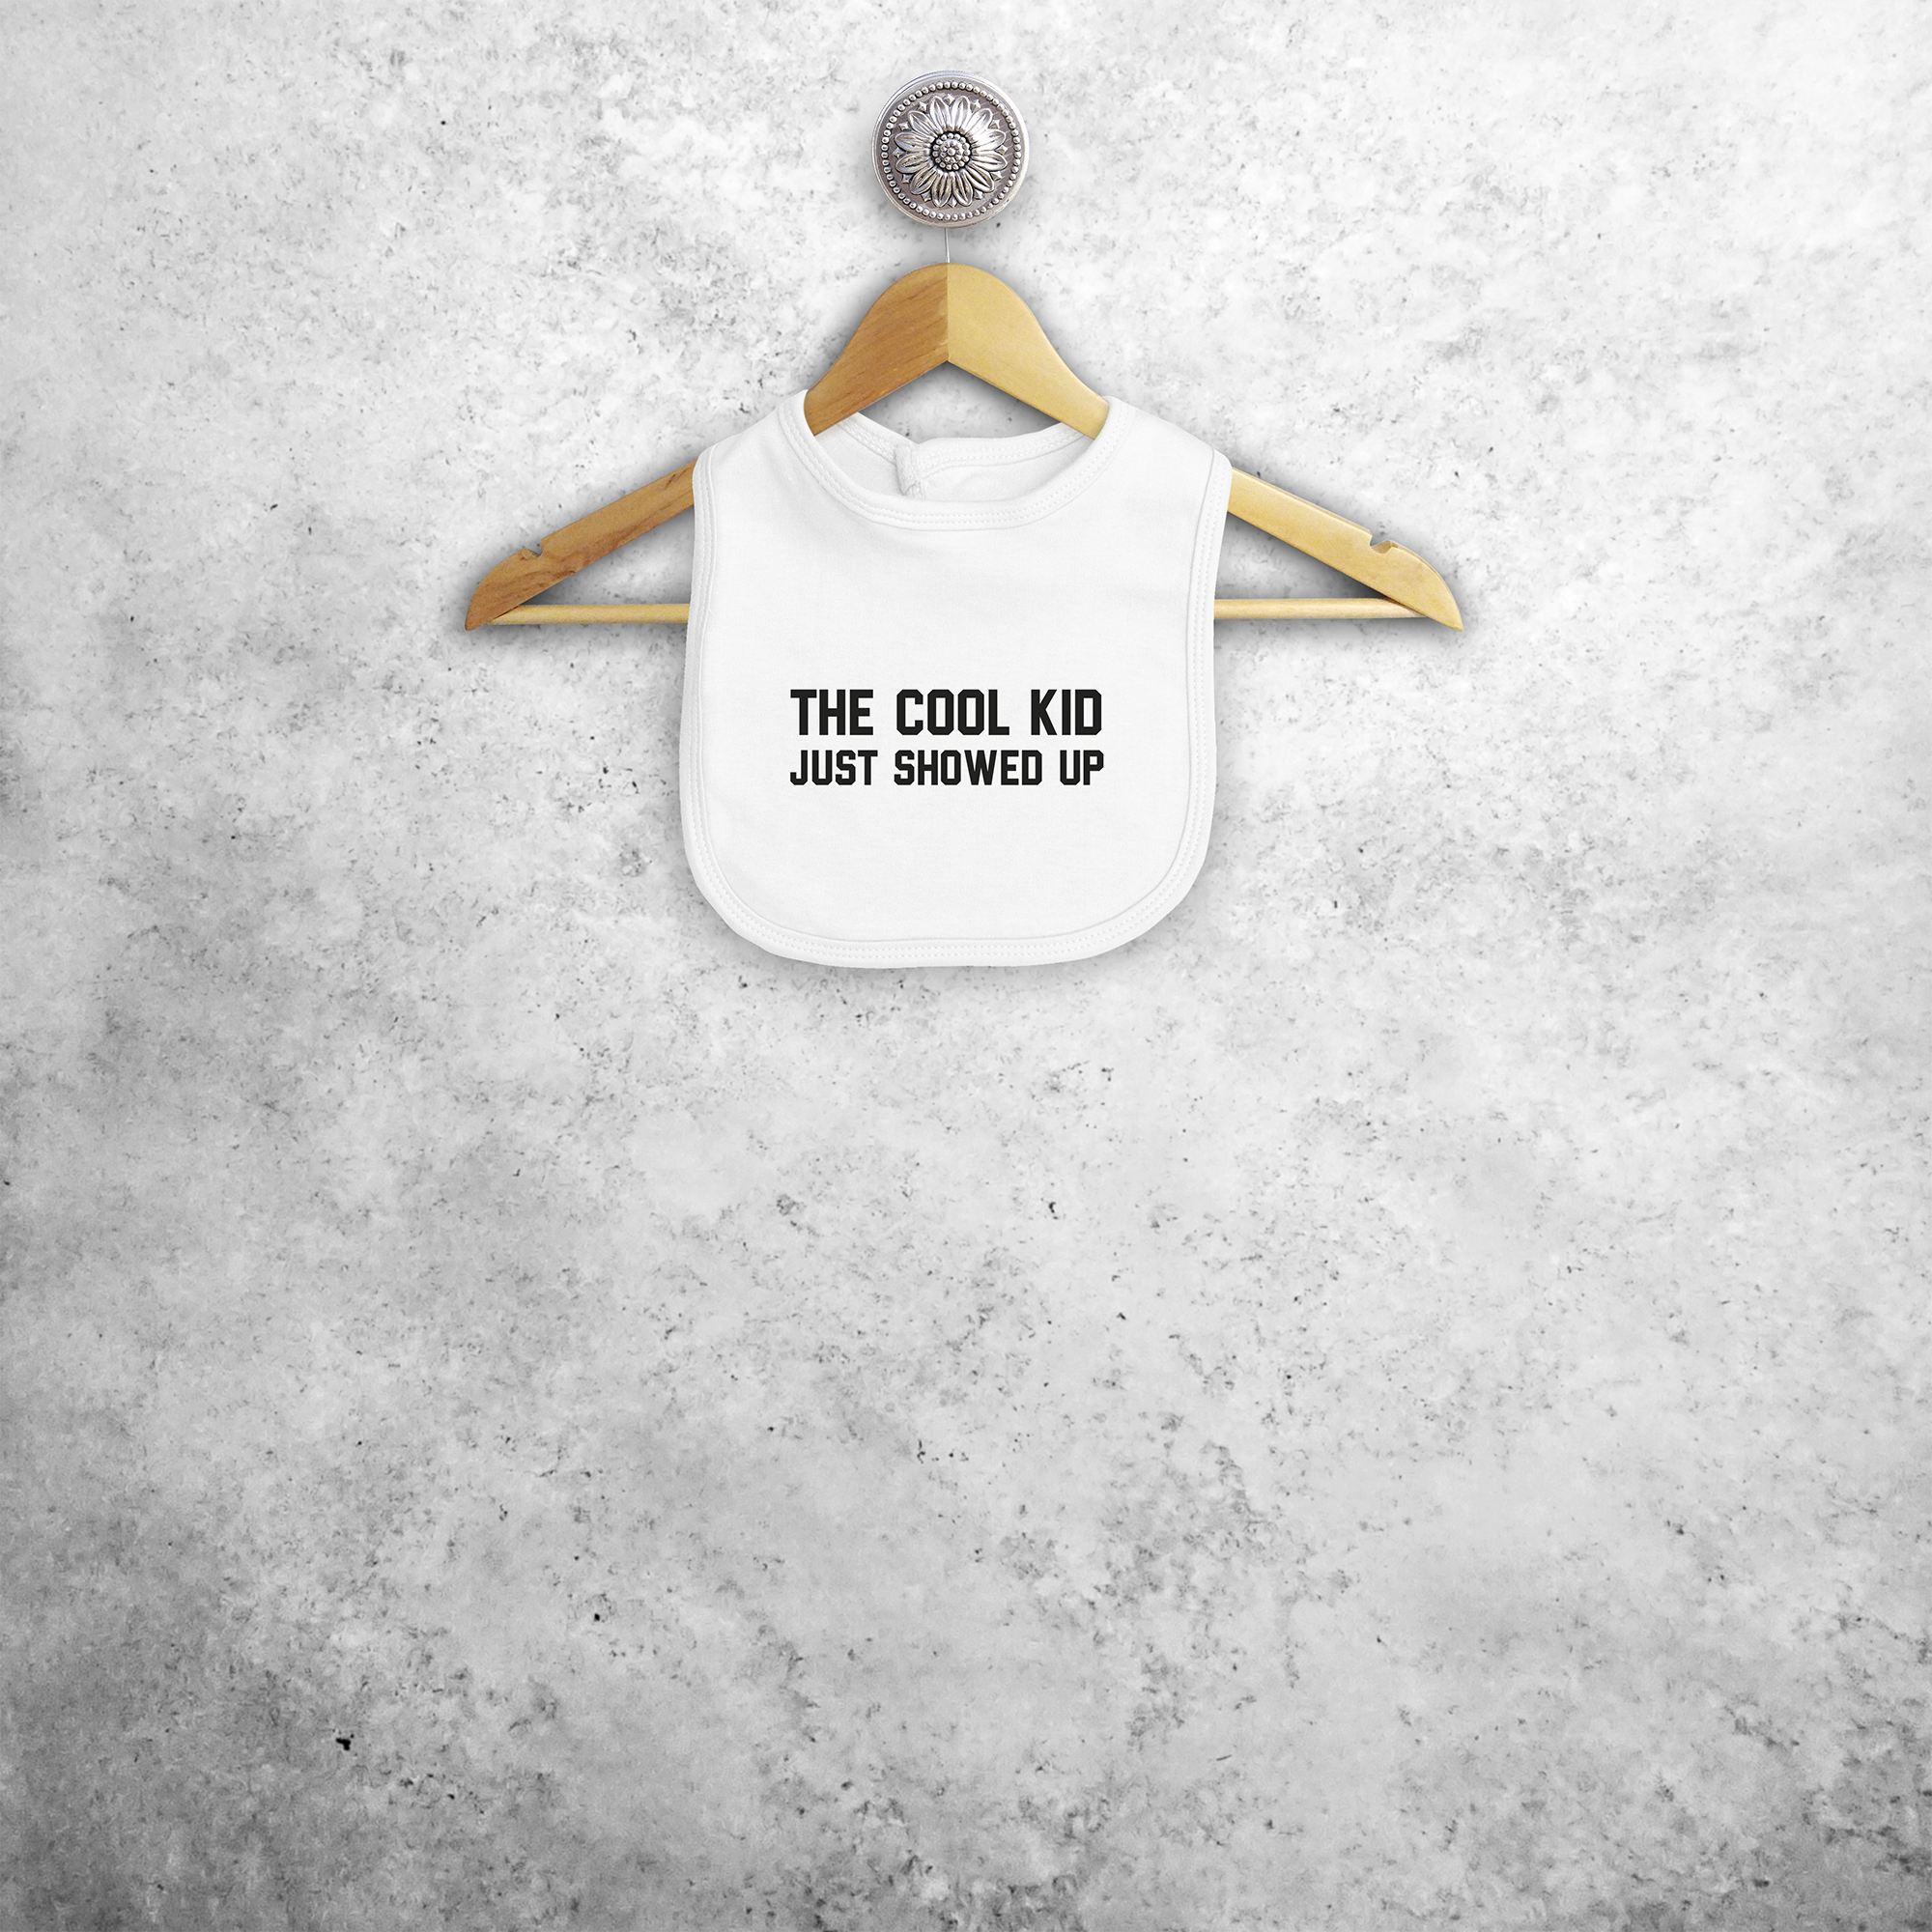 'The cool kid just showed up' baby bib